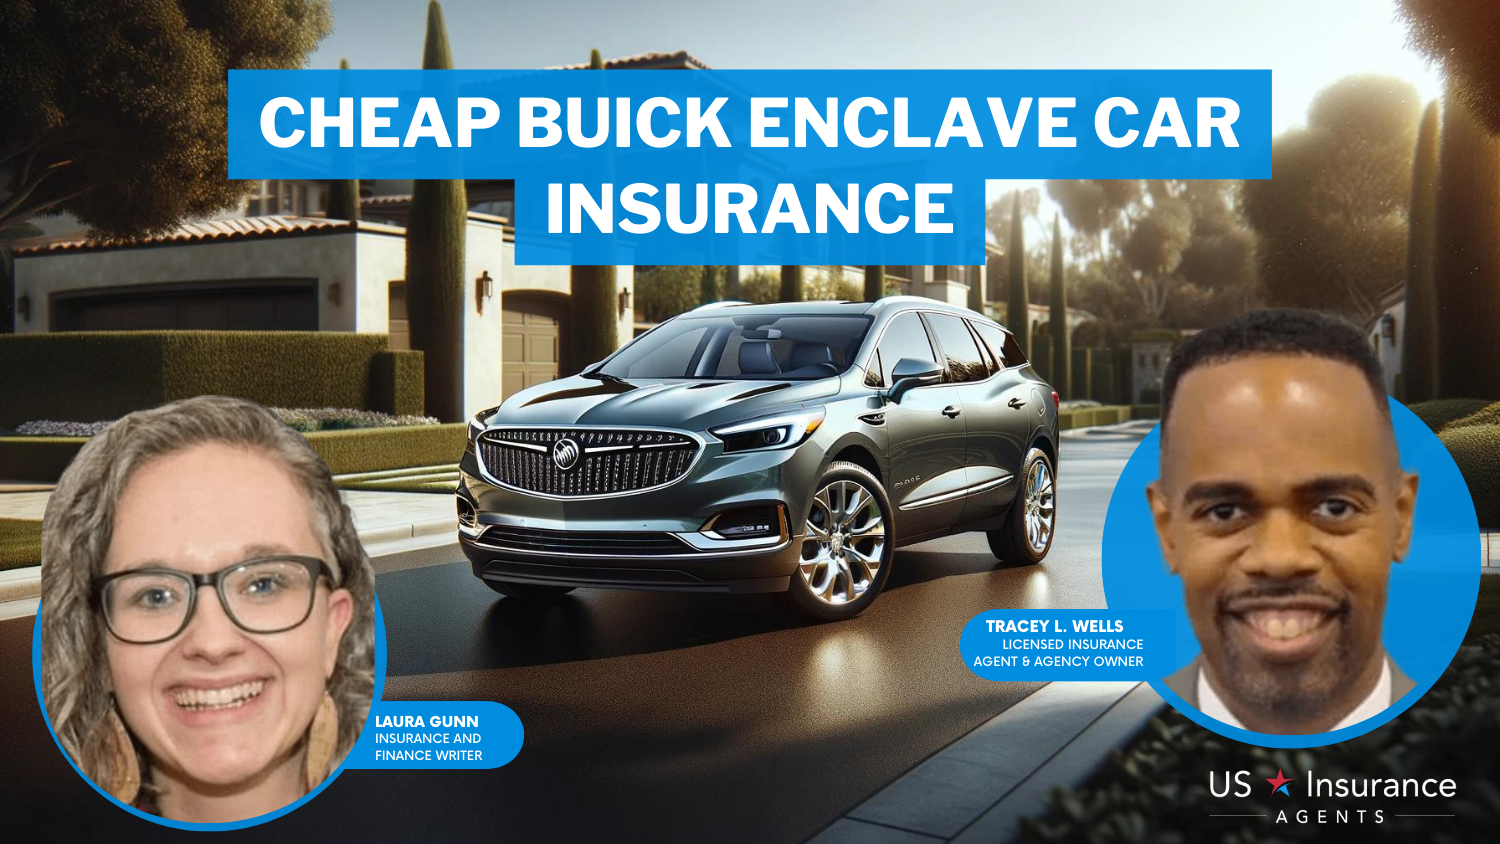 Erie Insurance: Cheap Buick Enclave Car Insurance, auto insurance - Erie, Auto-Owners, and State Farm